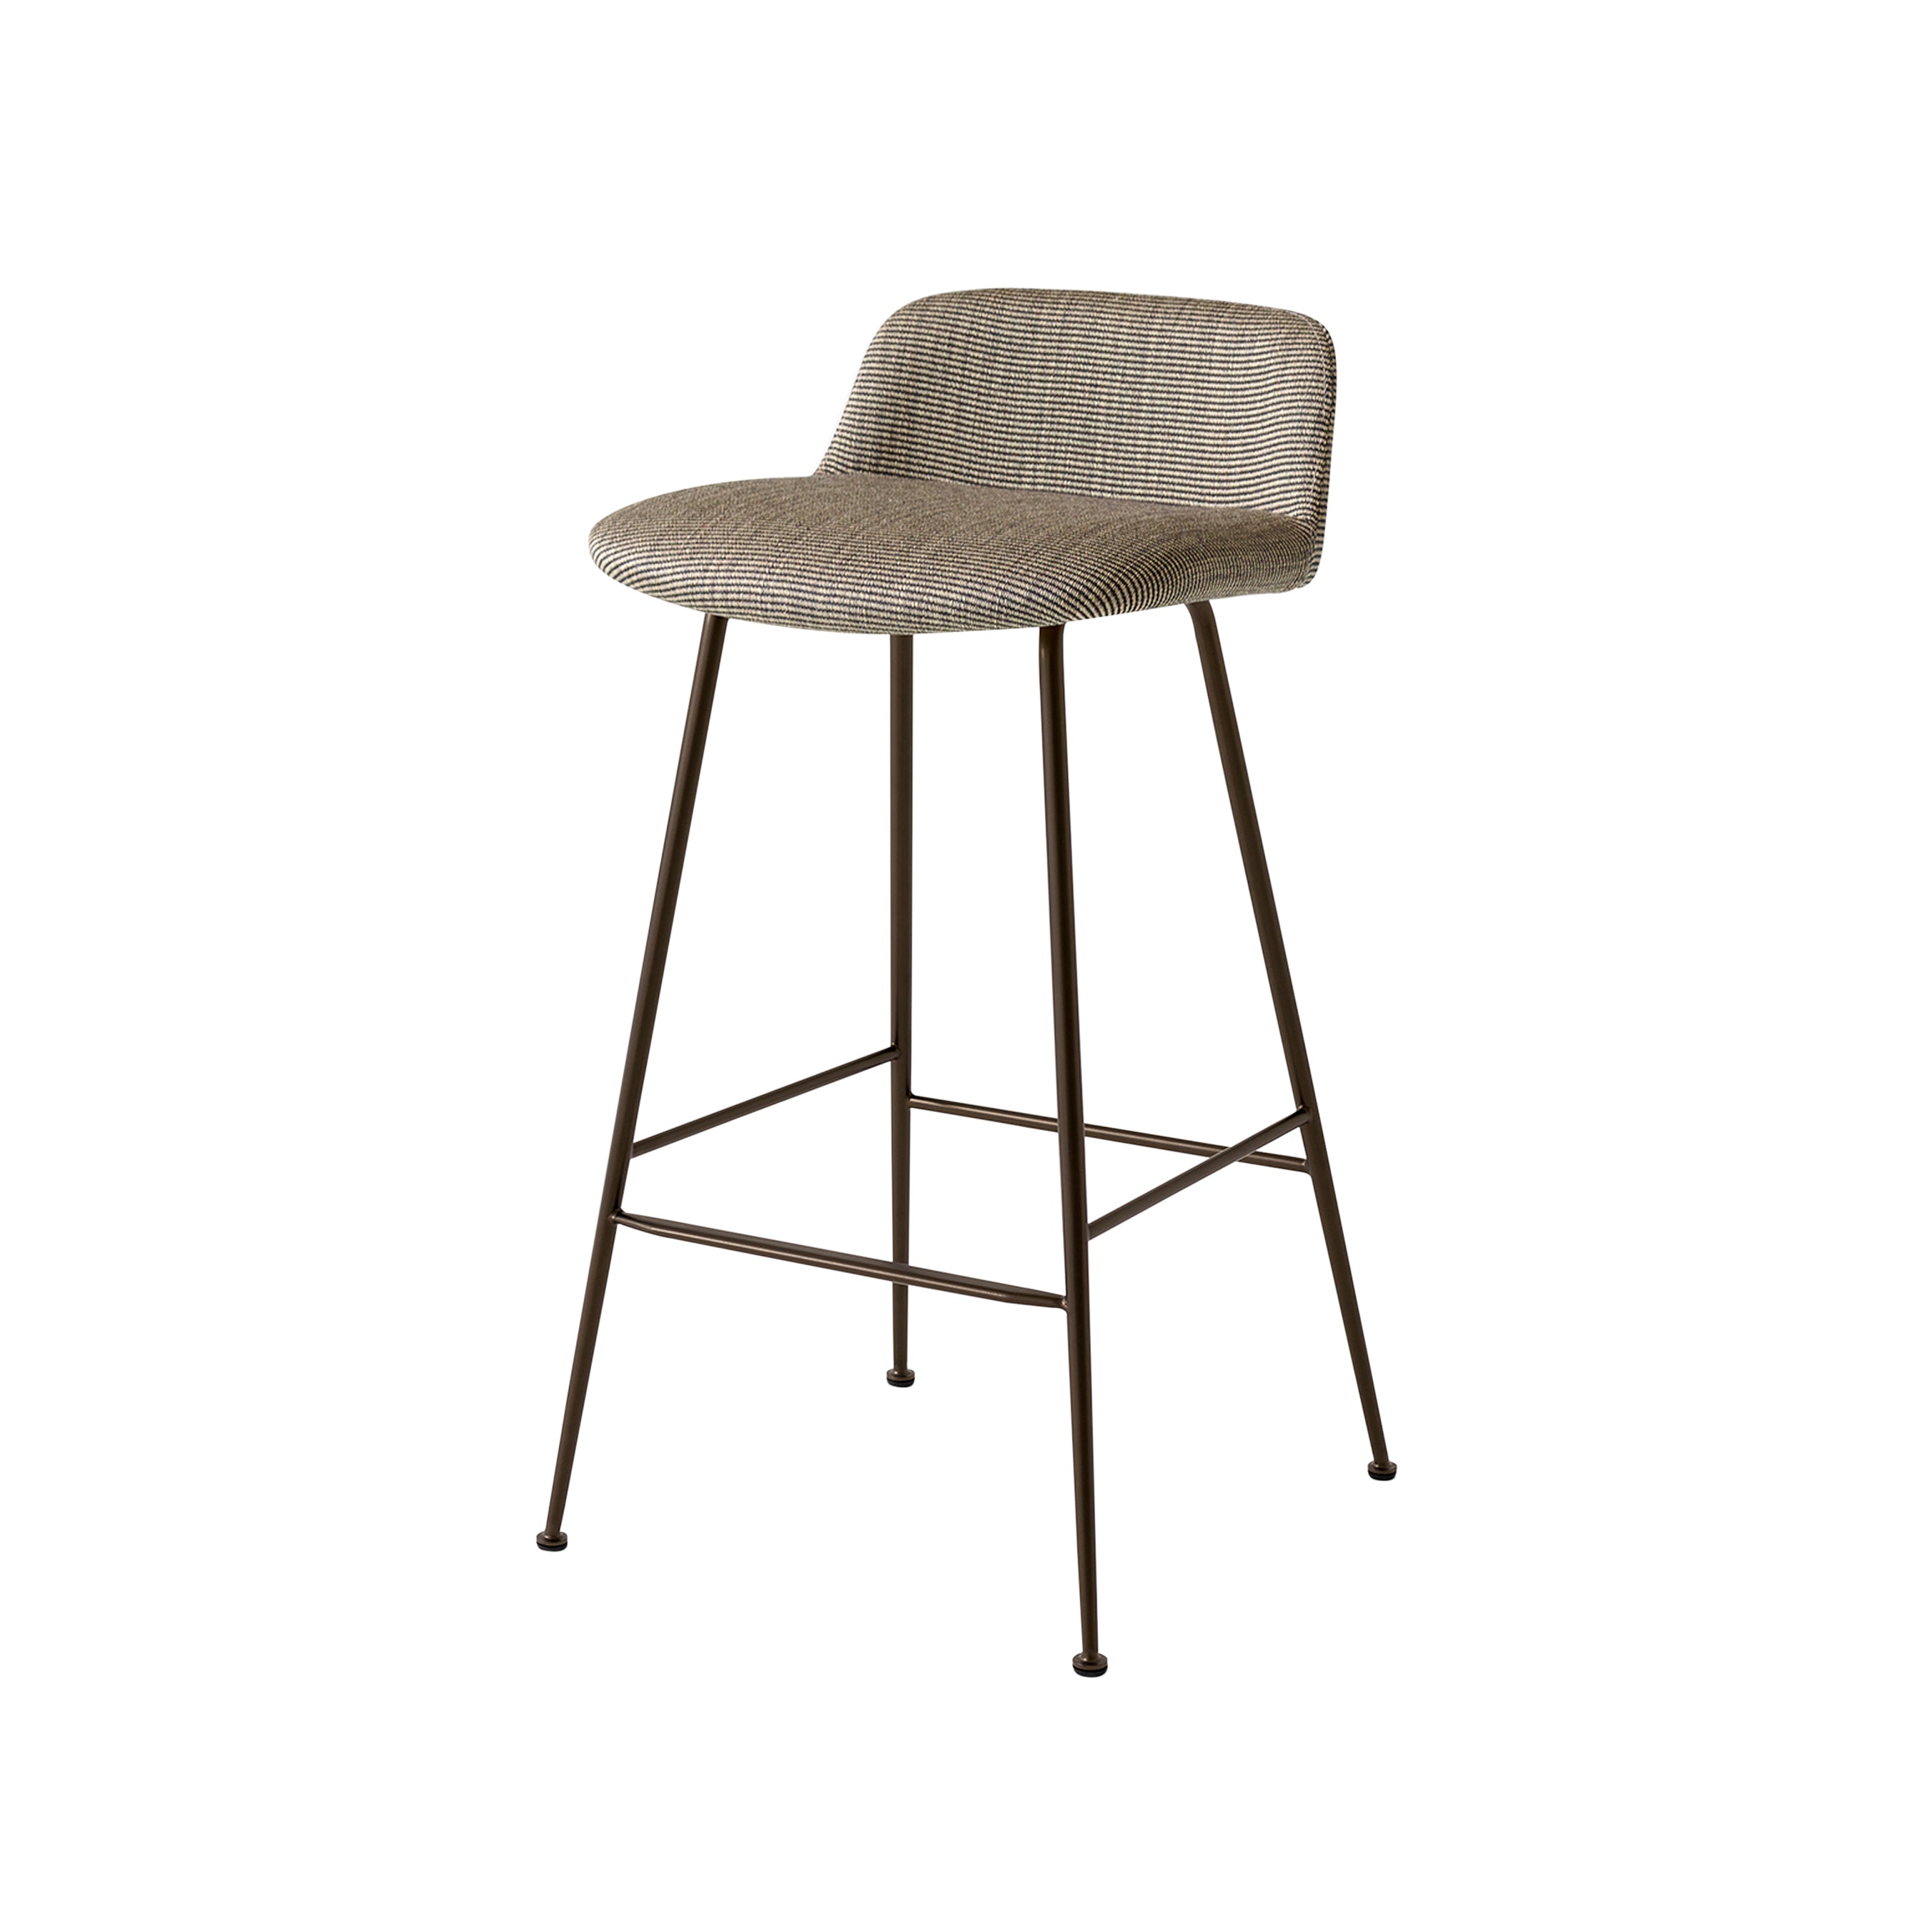 Rely Bar + Counter Stool: HW83 + HW88 + Counter (HW83) + Bronzed